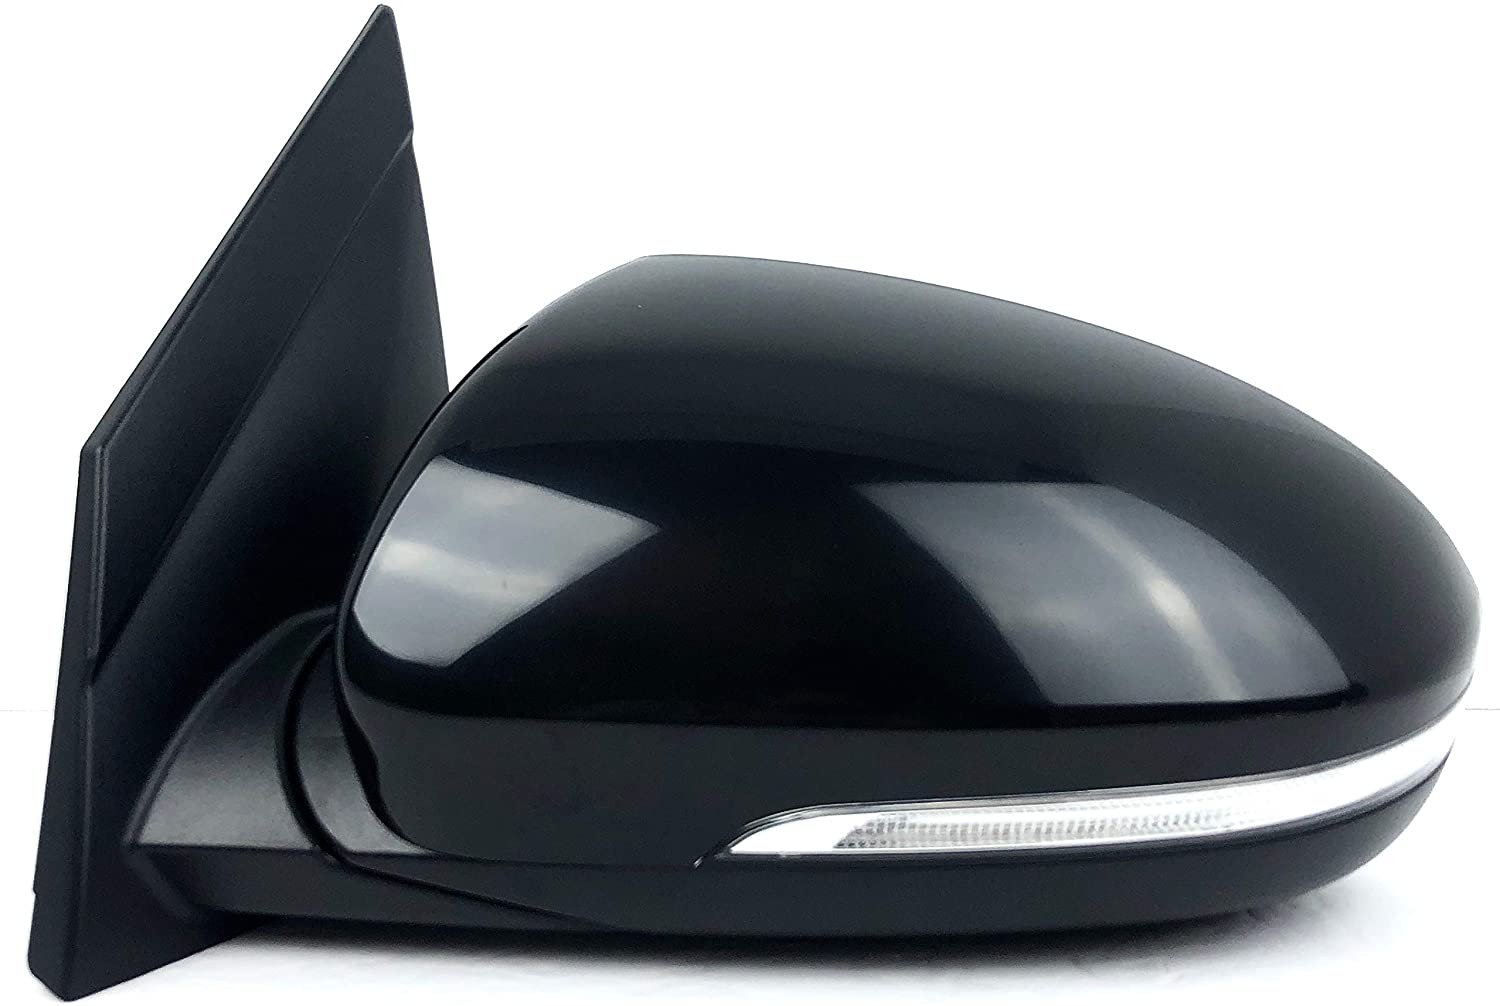 Aftermarket MIRRORS for HYUNDAI - TUCSON, TUCSON,16-18,LT Mirror outside rear view